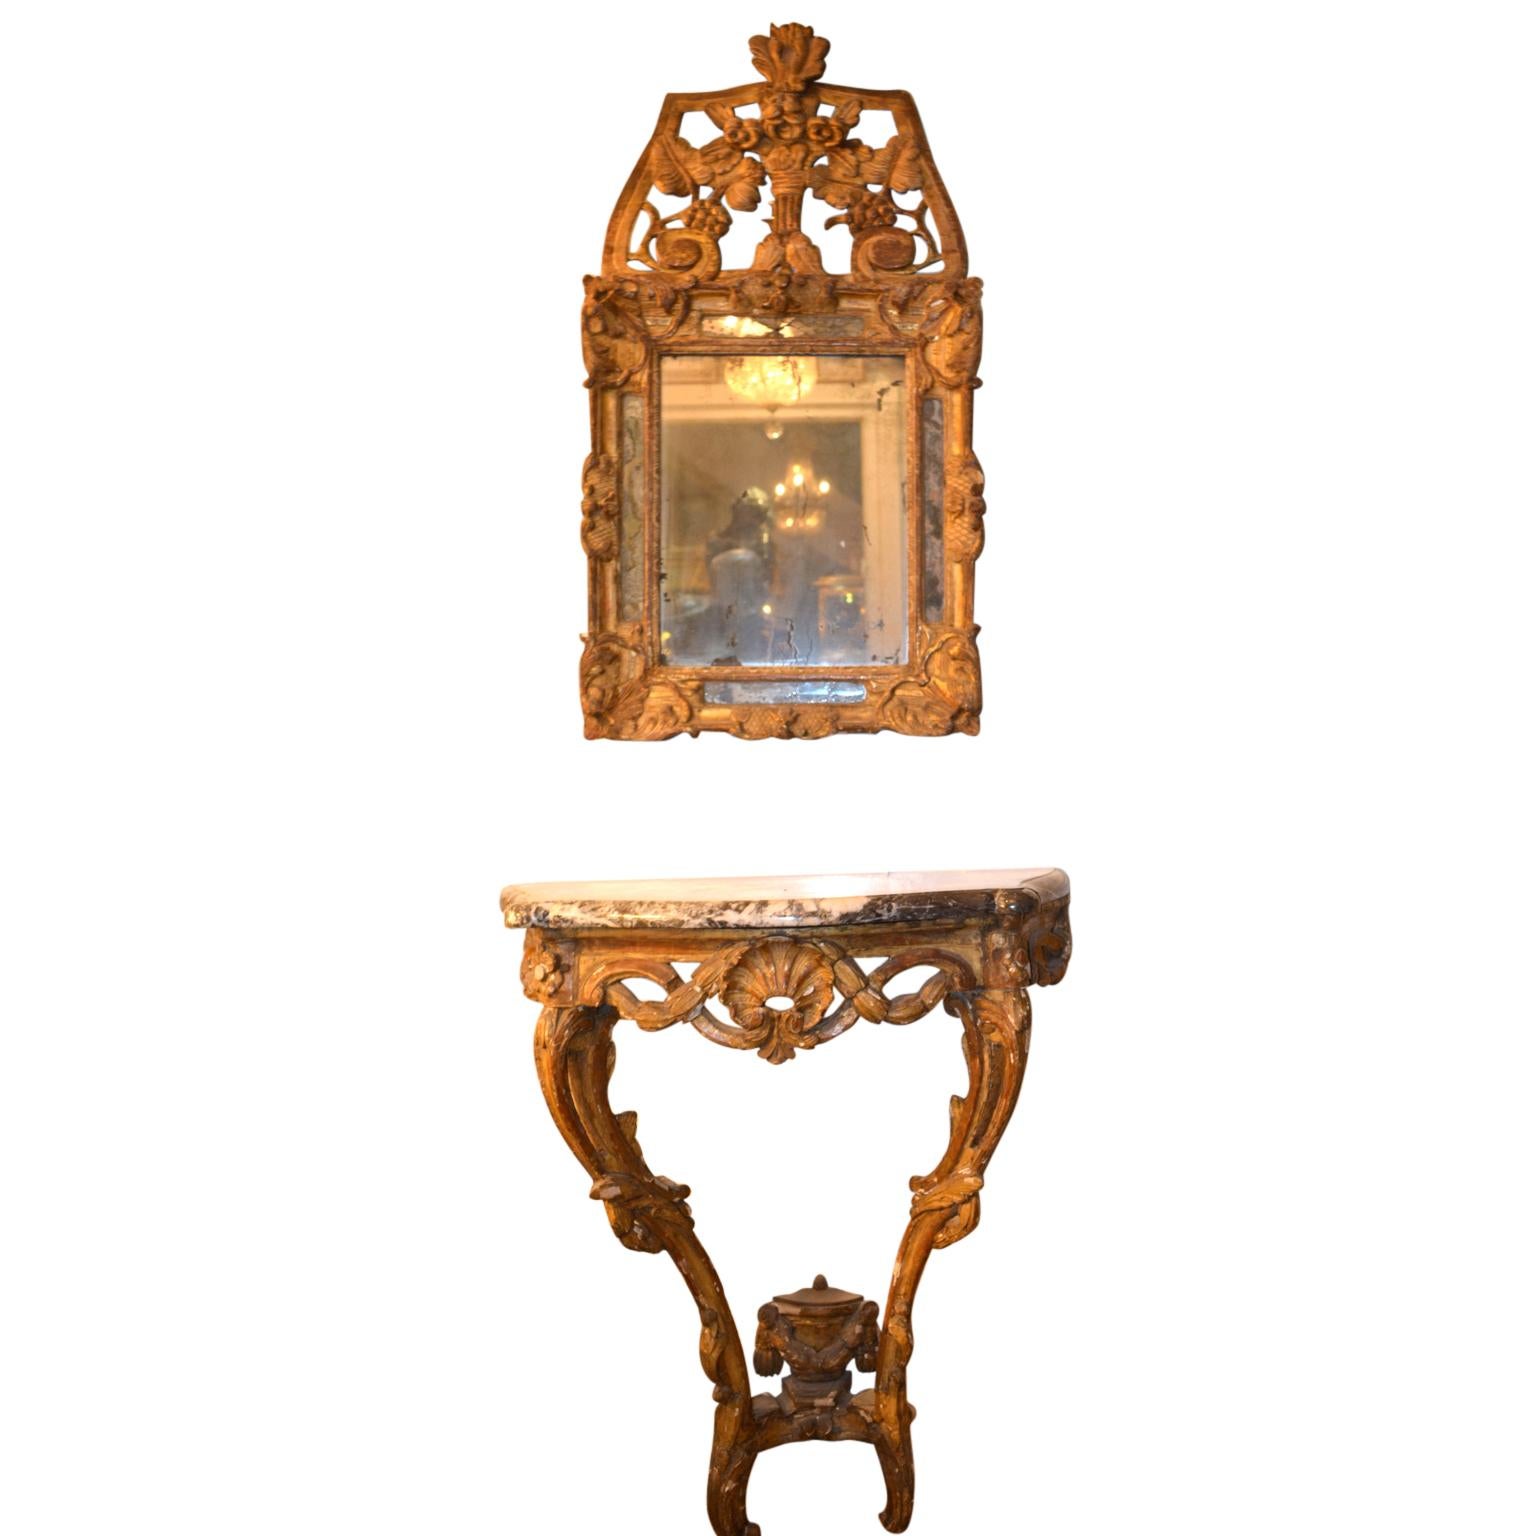 
A small period Louis XV carved and gilded beechwood console table, the palm entwined roccaille cabriole legs joined by a similarly carved stretcher crowned with carved swagged urn. The console is surmounted with a serpentine shaped grey and white